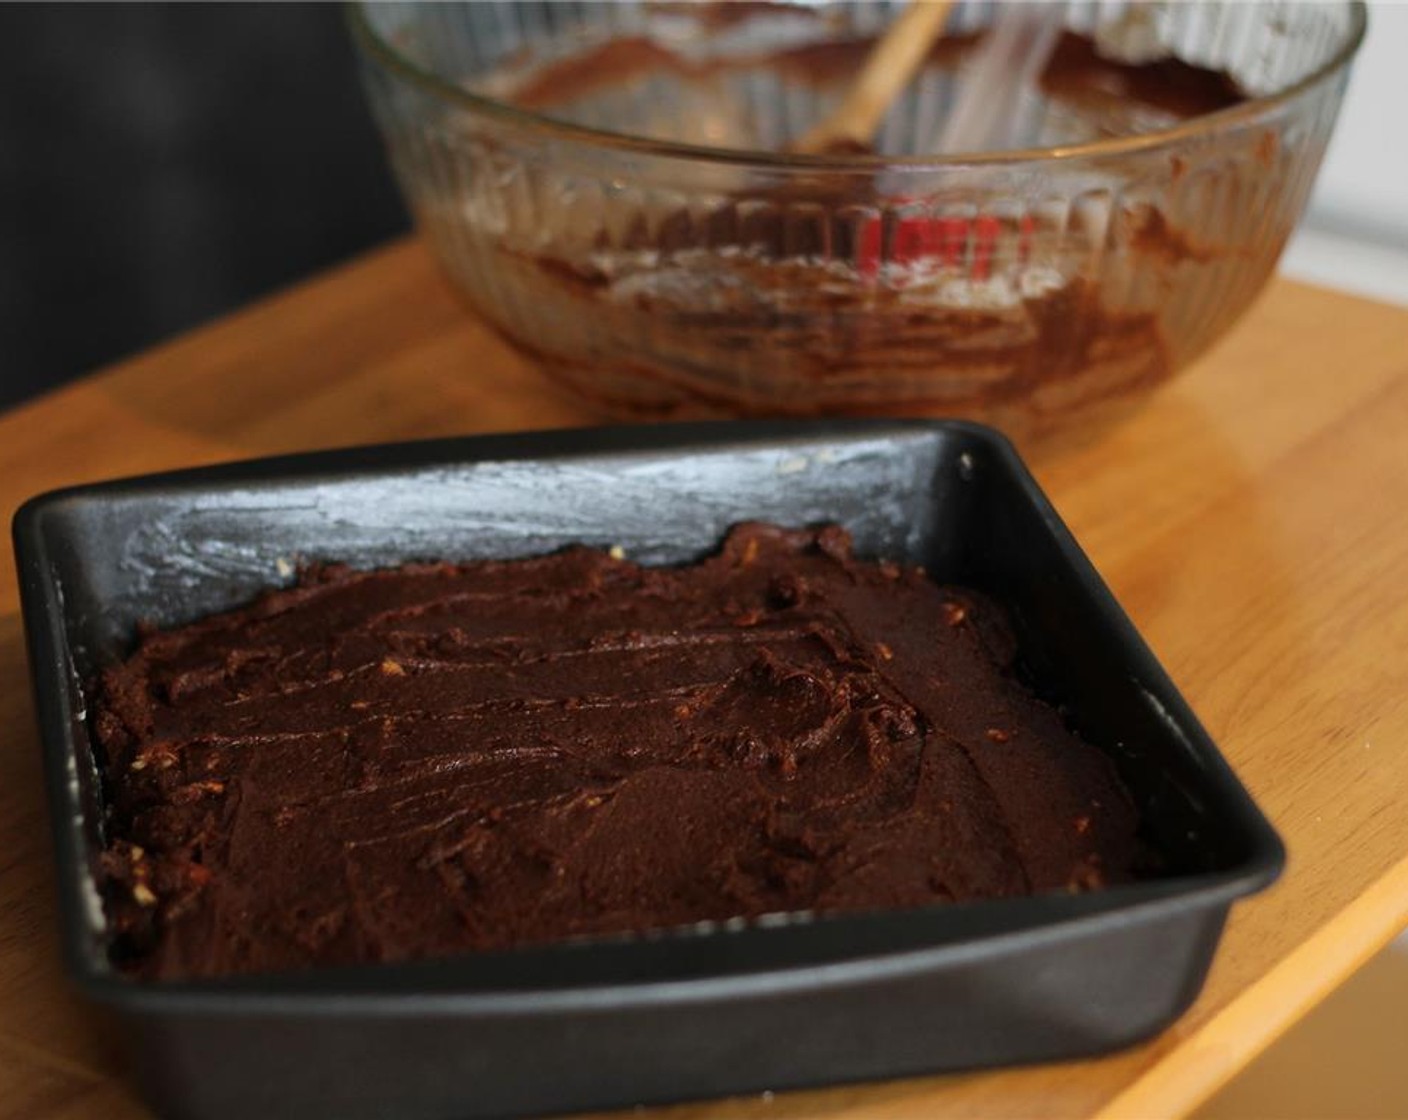 step 6 Allow the brownies to cool for 10 minutes at room temperature.